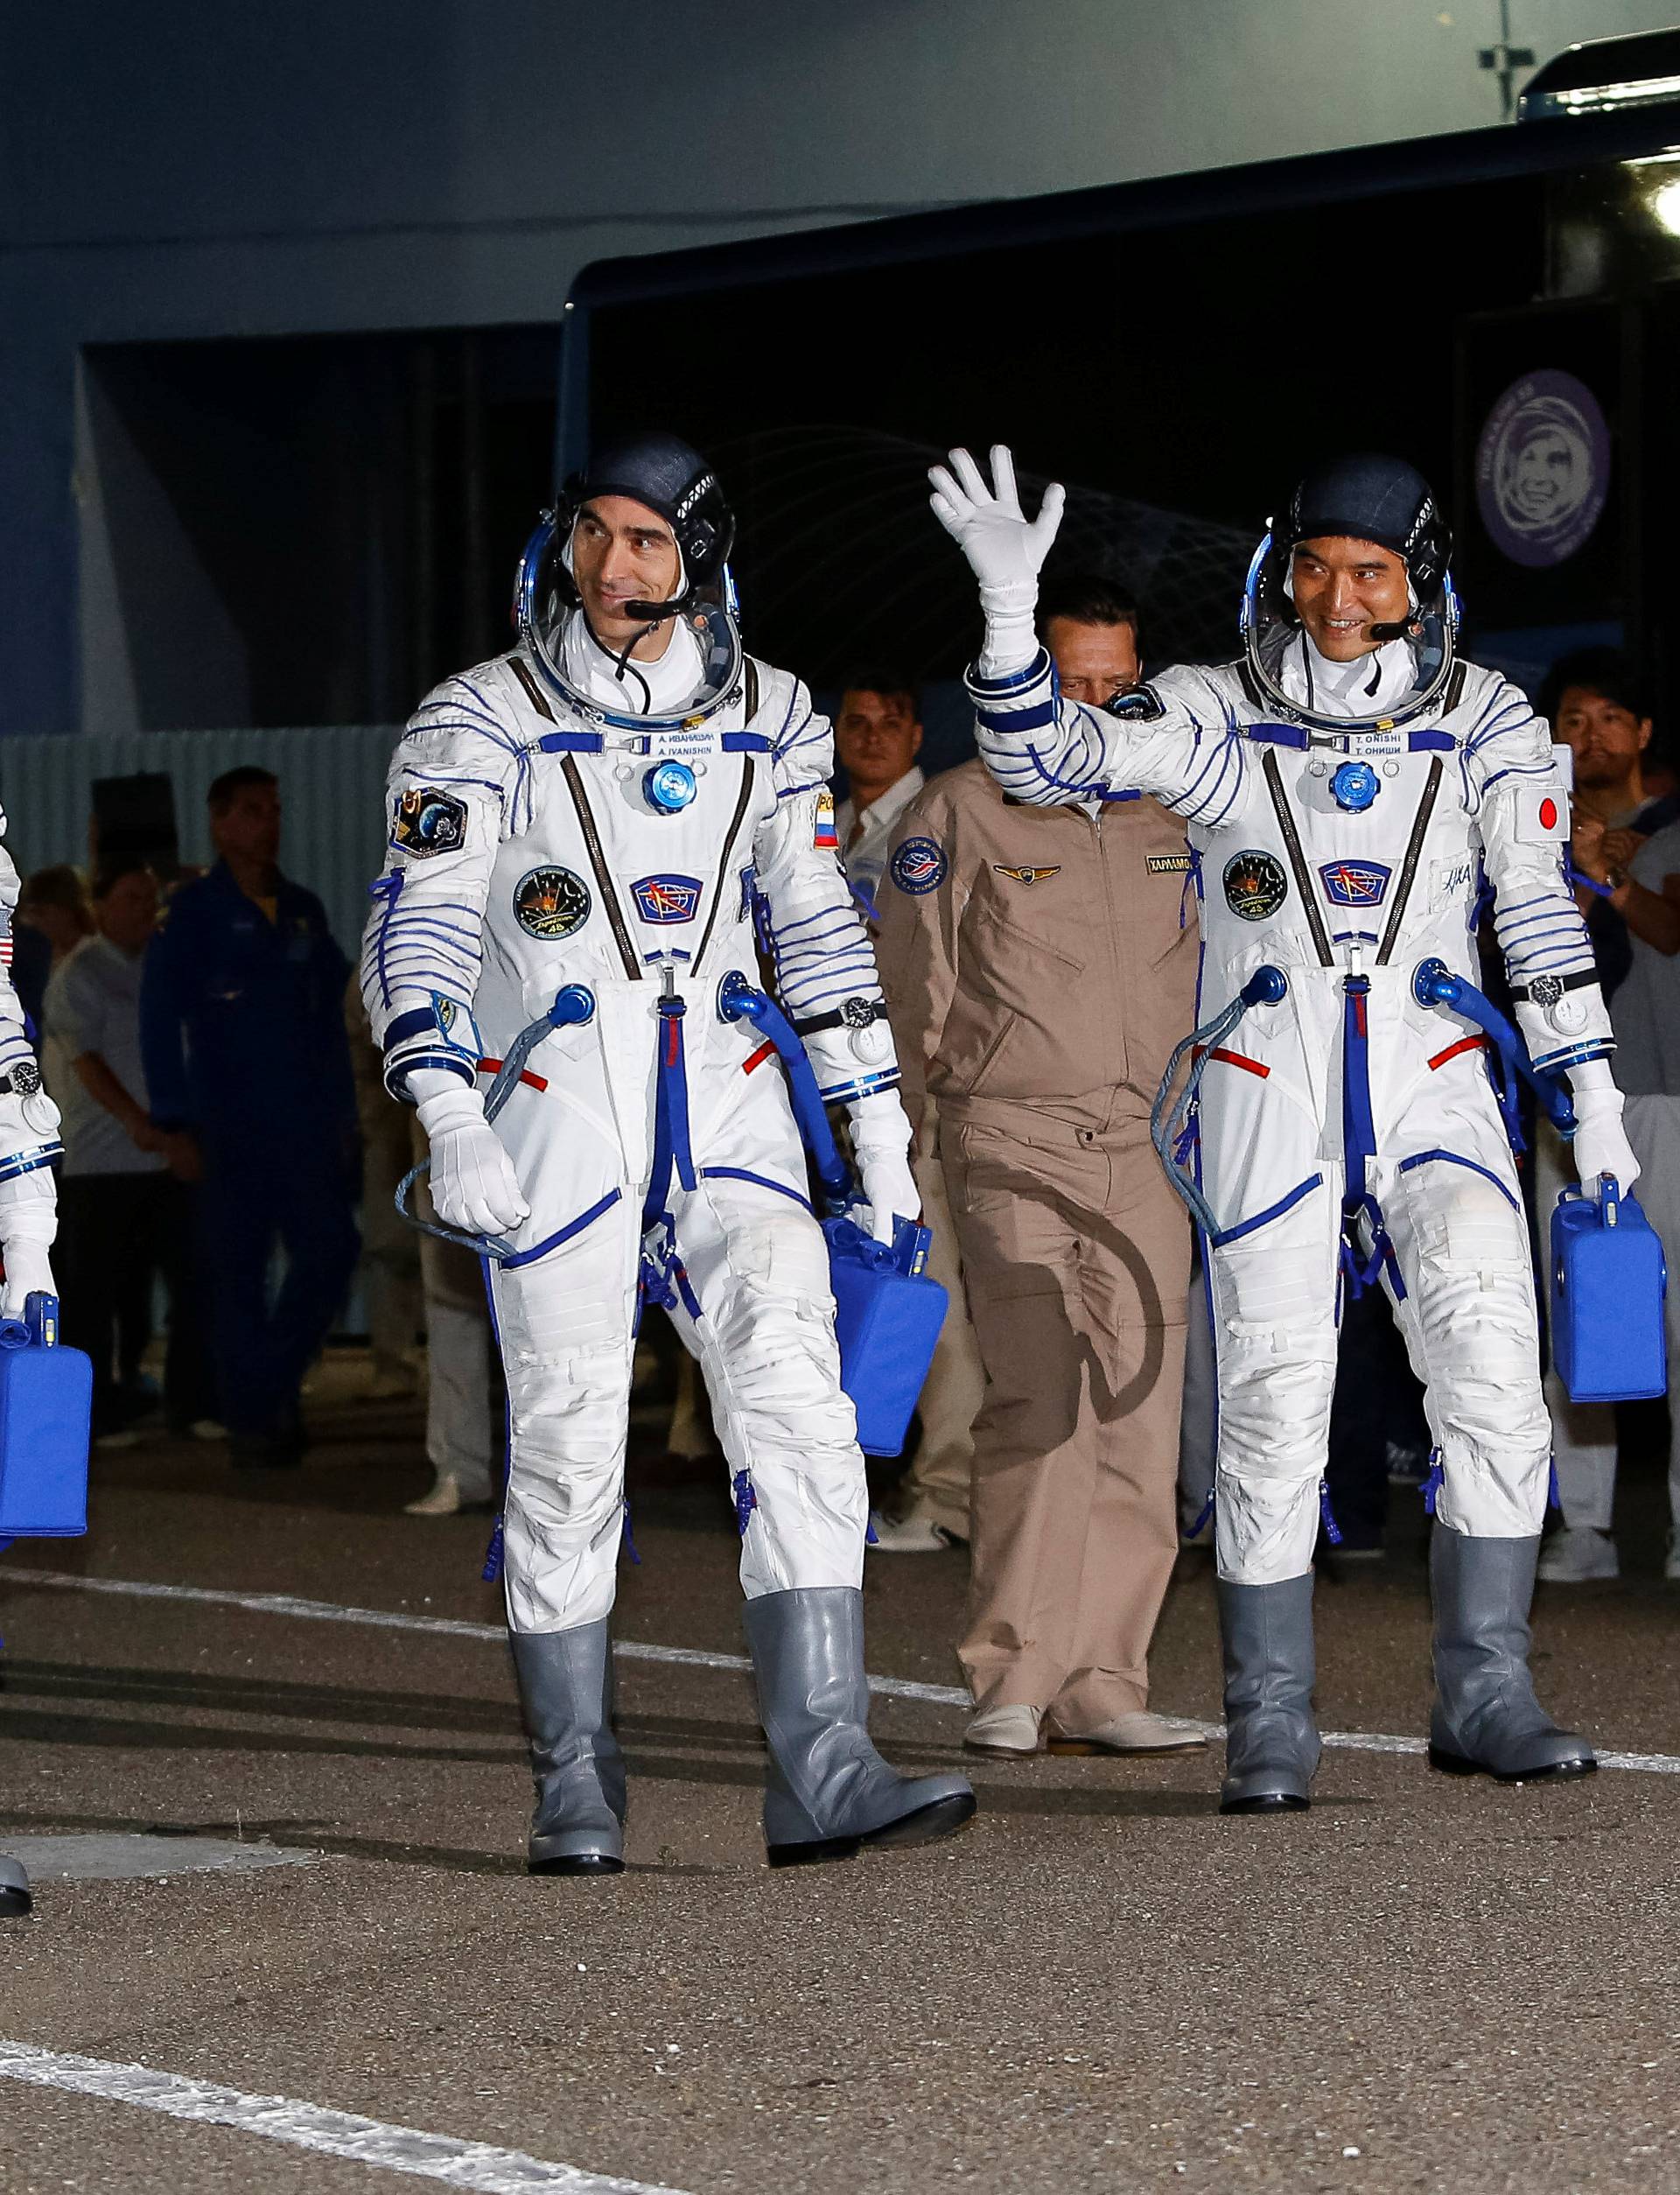 The ISS crew members Kate Rubins of the U.S., Anatoly Ivanishin of Russia and Takuya Onishi of Japan walk after donning space suits at the Baikonur cosmodrome, Kazakhstan